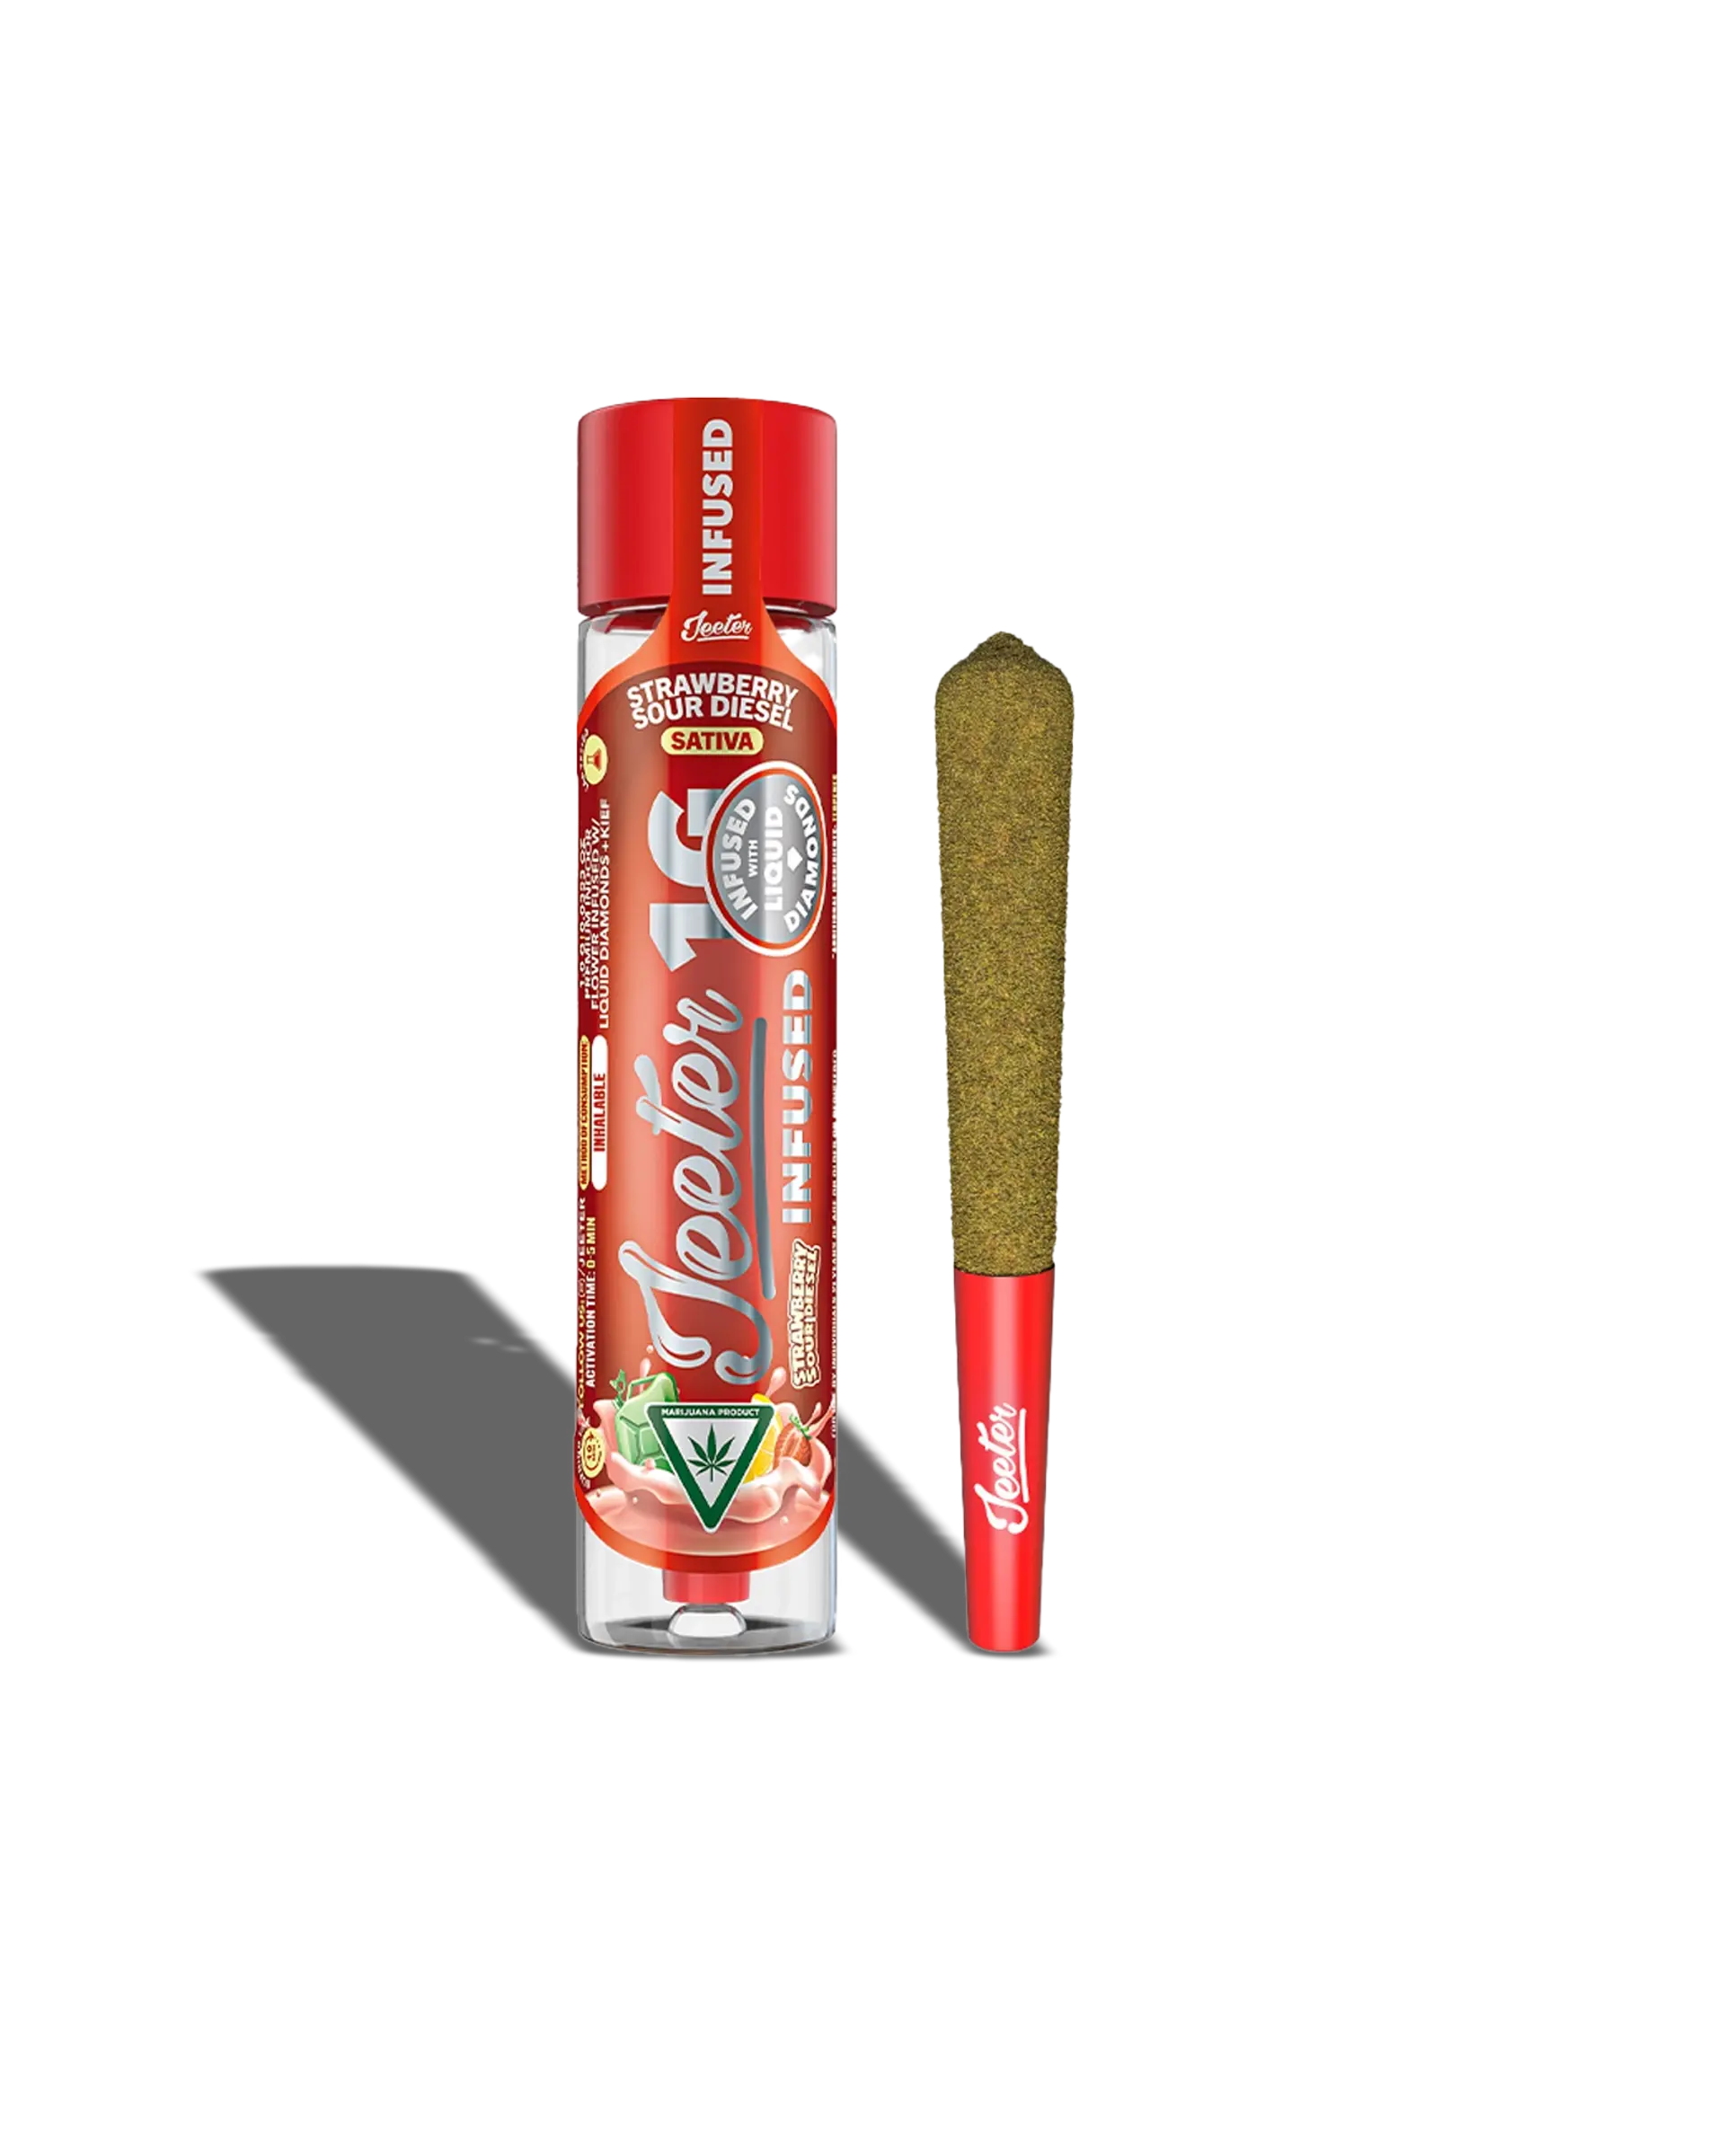 Jeeter Strawberry Sour Diesel Infused Preroll 1g